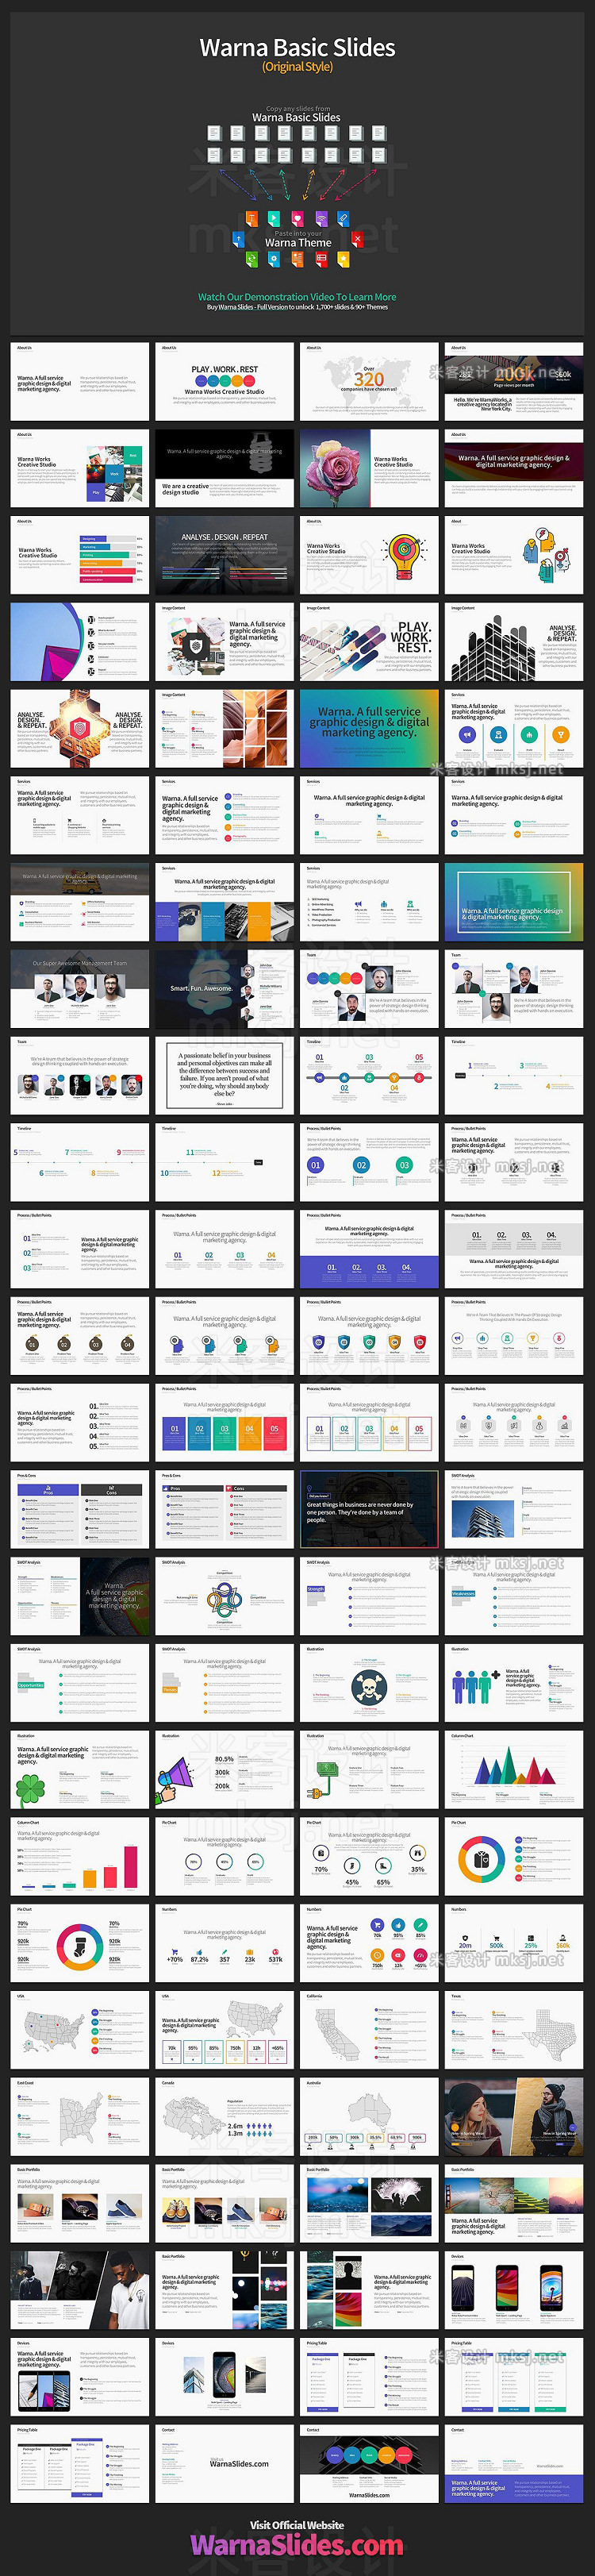 PPT模板 Colorama PowerPoint Template